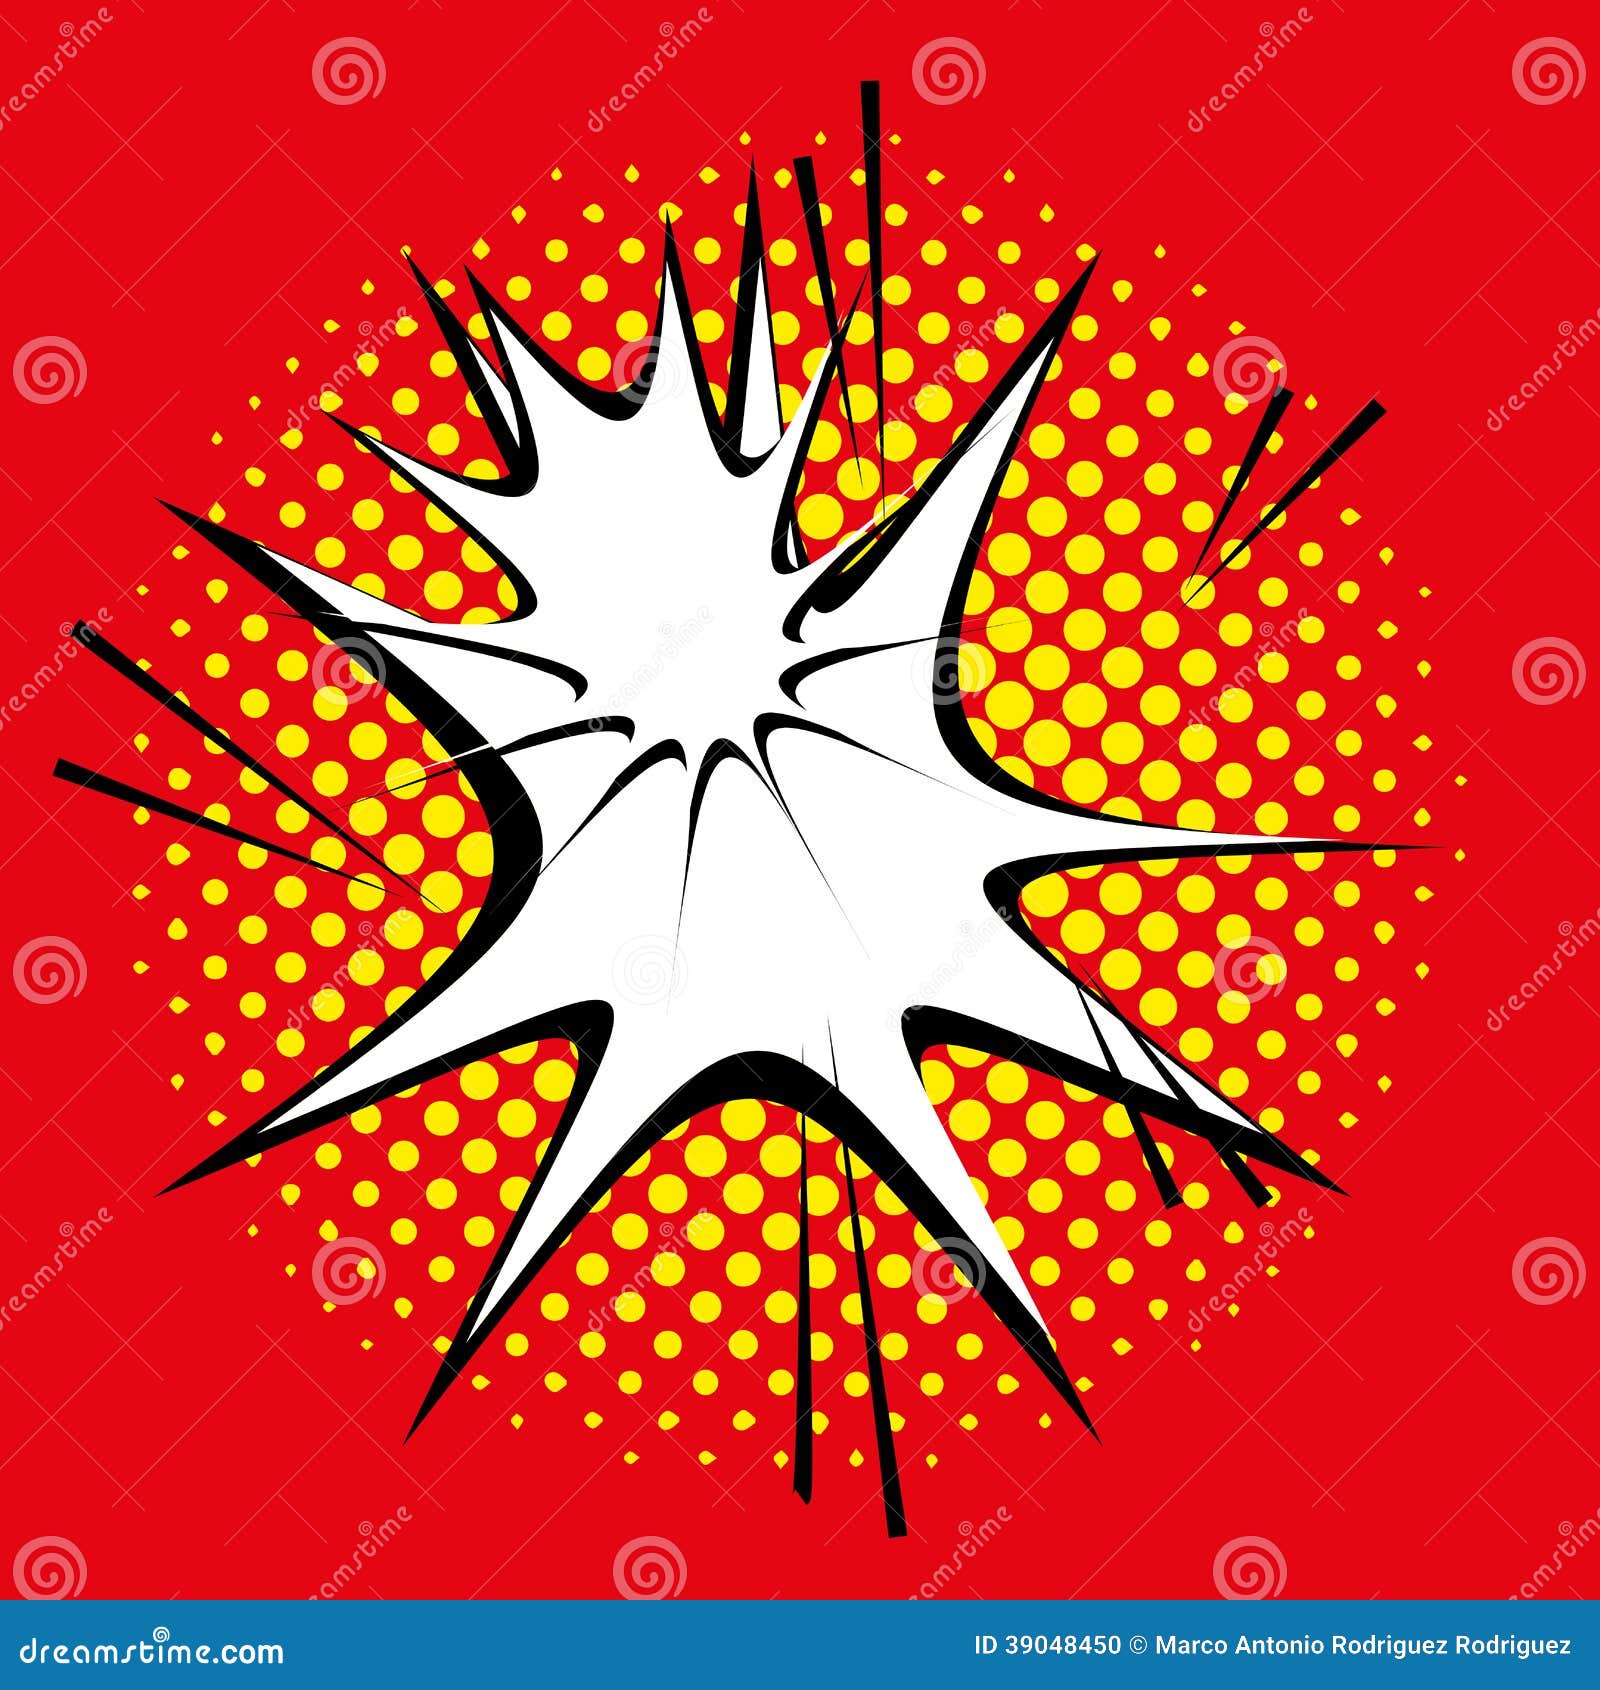 Comic Style Explosion Effect Isolated Stock Vector - Image: 39048450